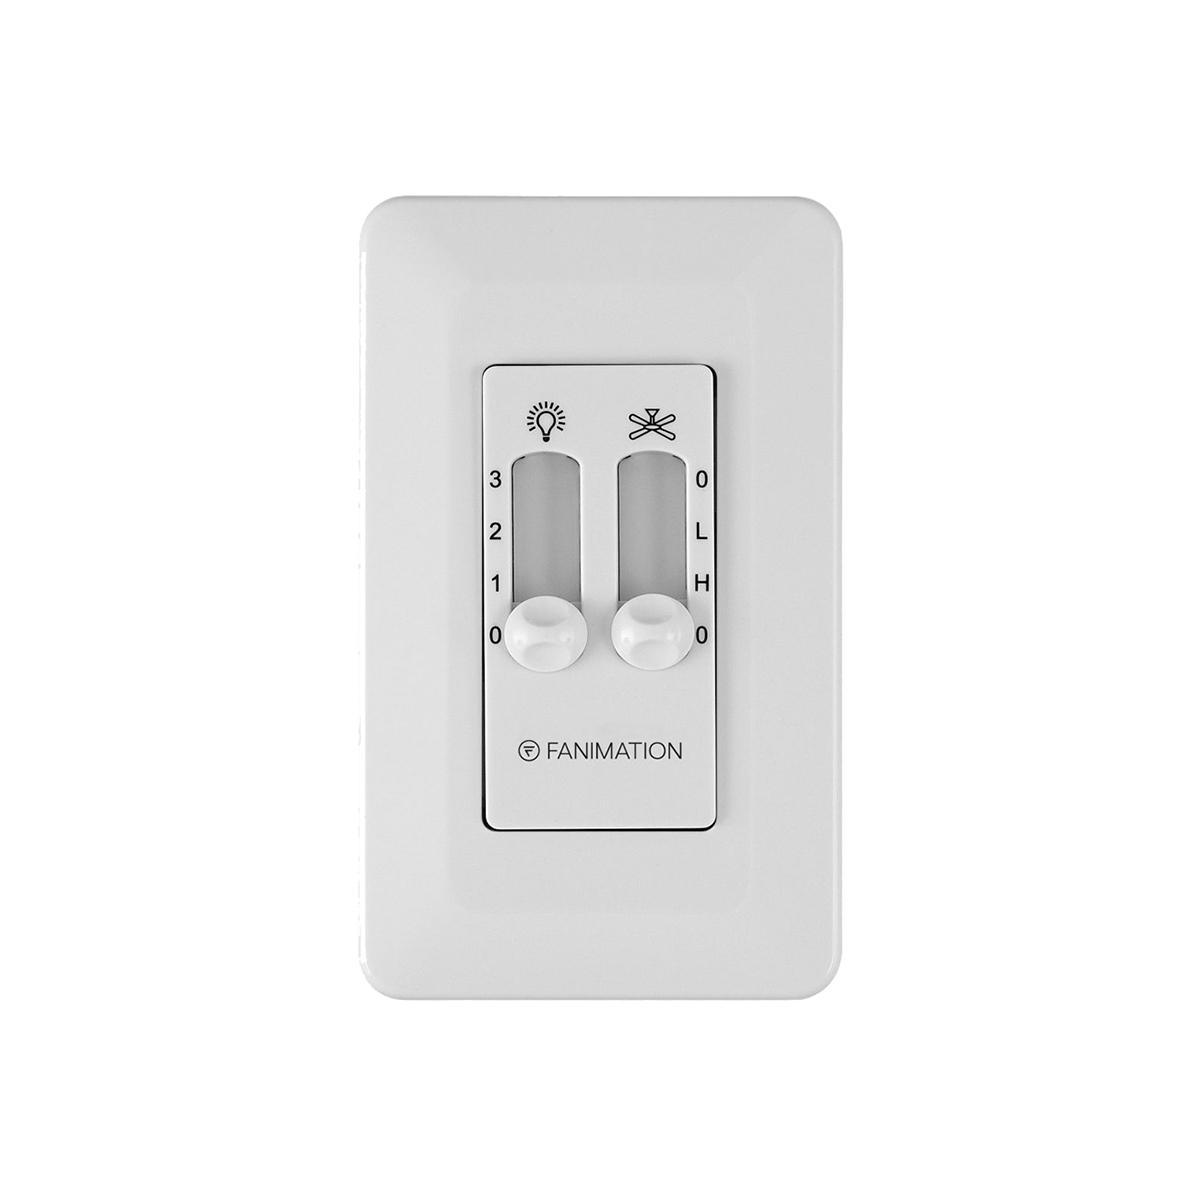 2-Speed Ceiling Fan And Light Wall Control, White Finish